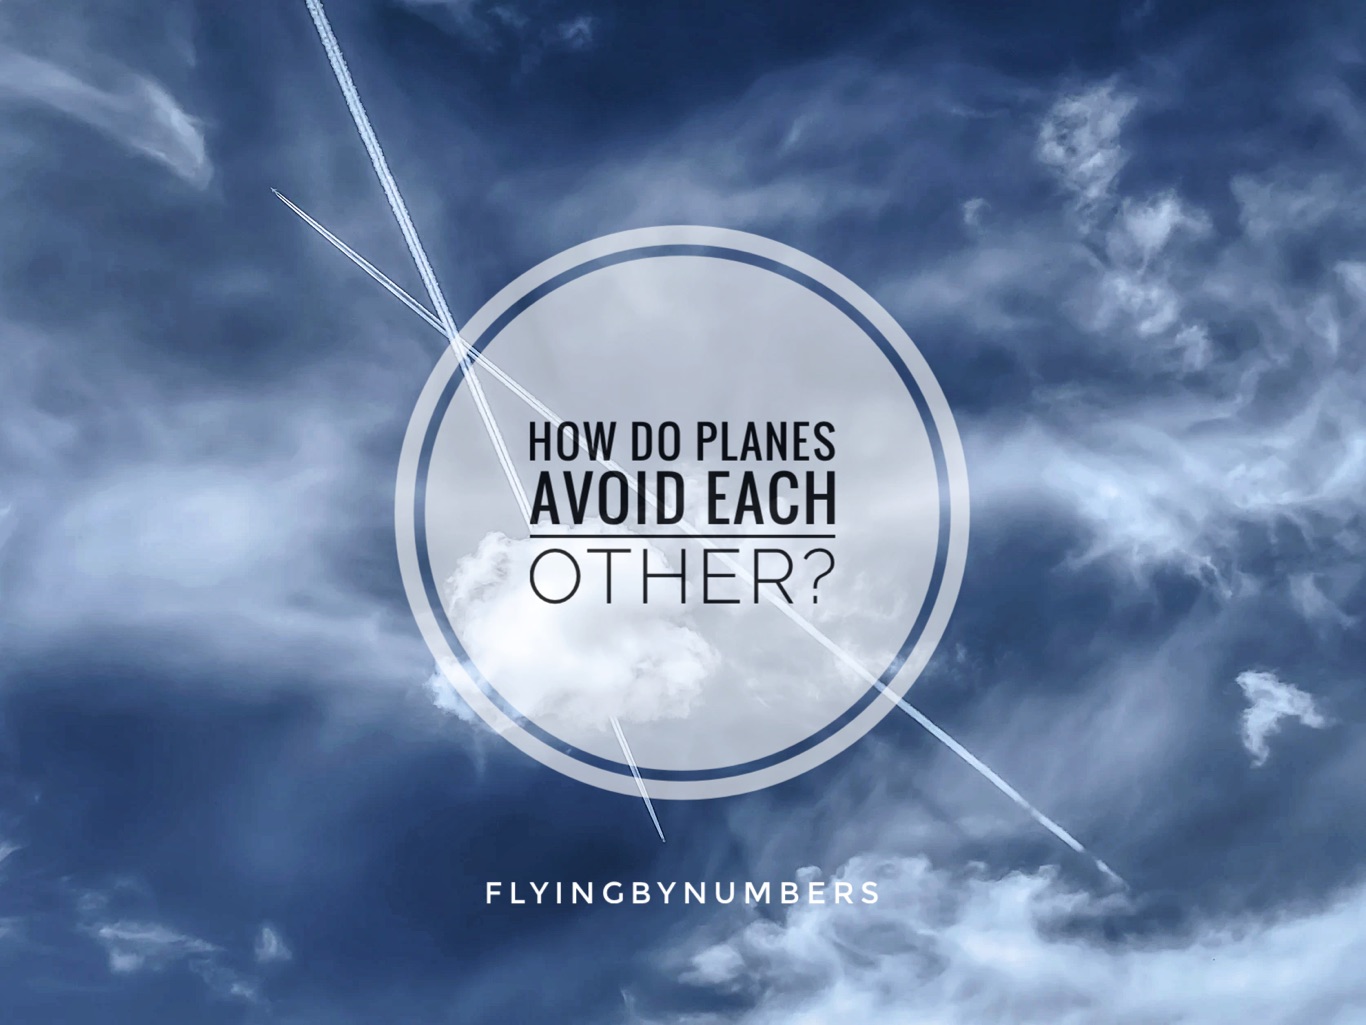 Two planes crossing in the sky — but how do planes avoid each other